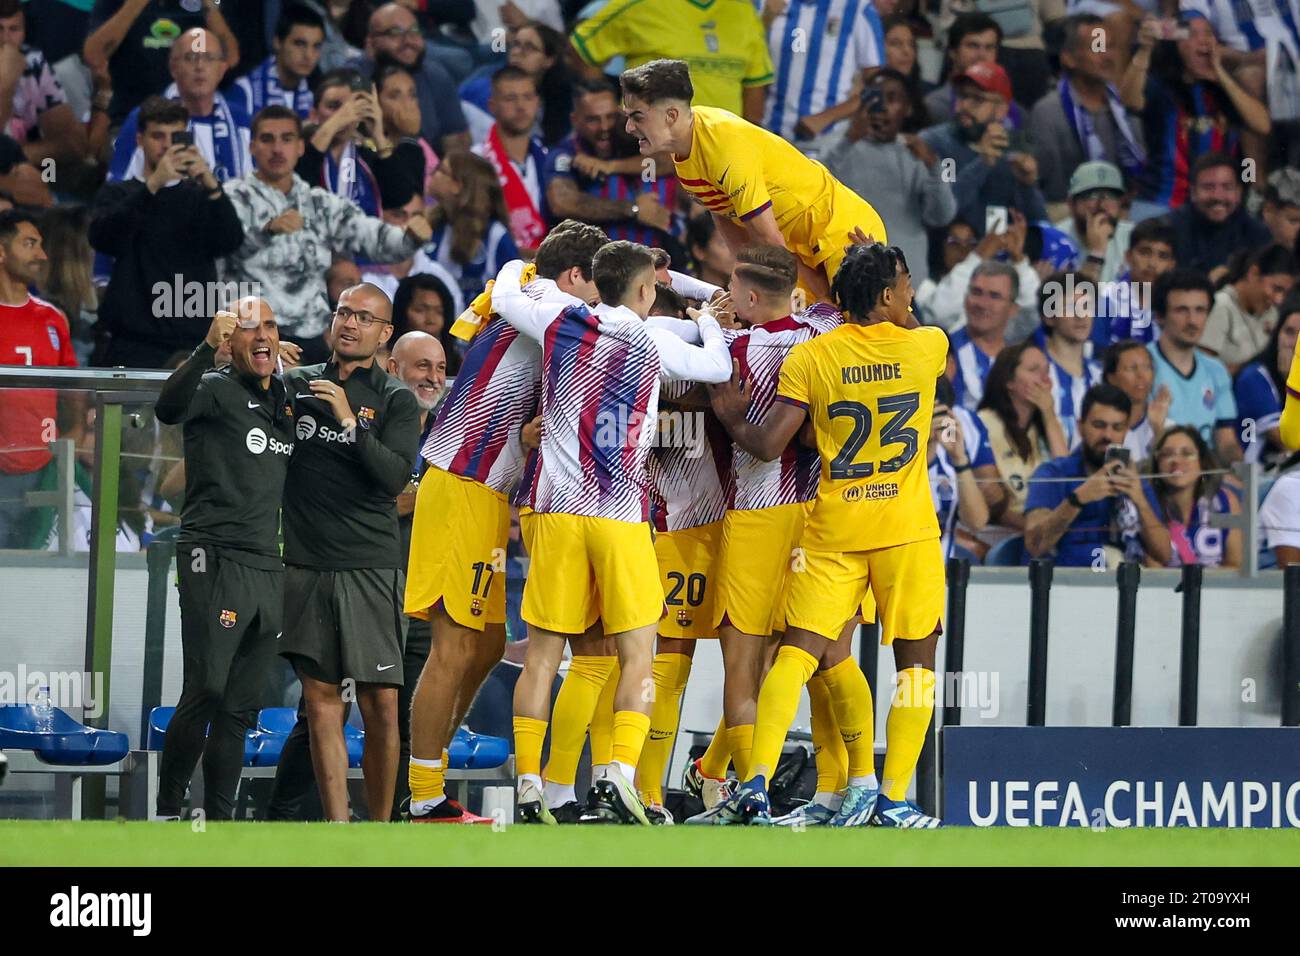 Ferran Torres (FC Barcelona) celebrating the goal during the UEFA Champions League Group H, Game 2, match between FC Porto and FC Barcelona Stock Photo